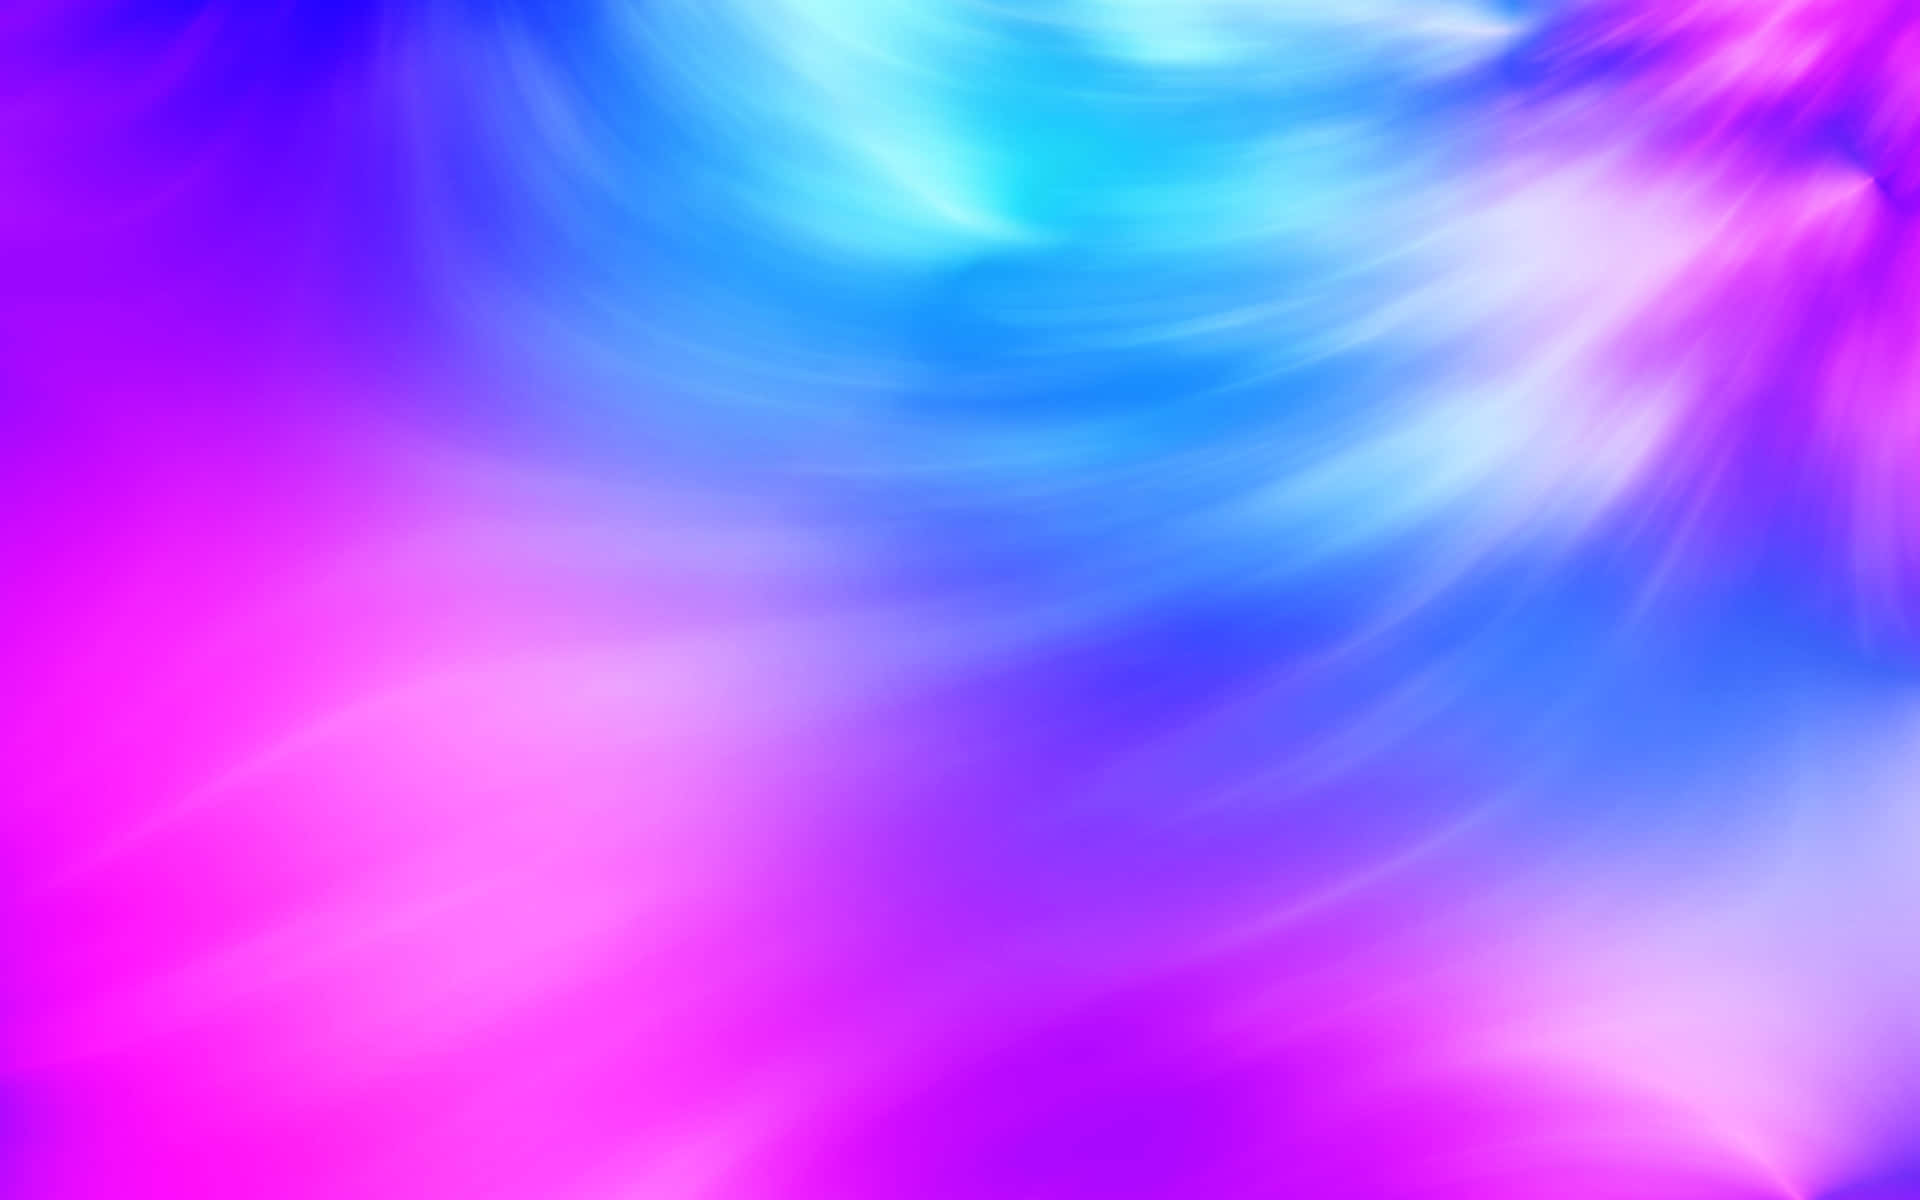 An abstract Purple and Blue swirl background